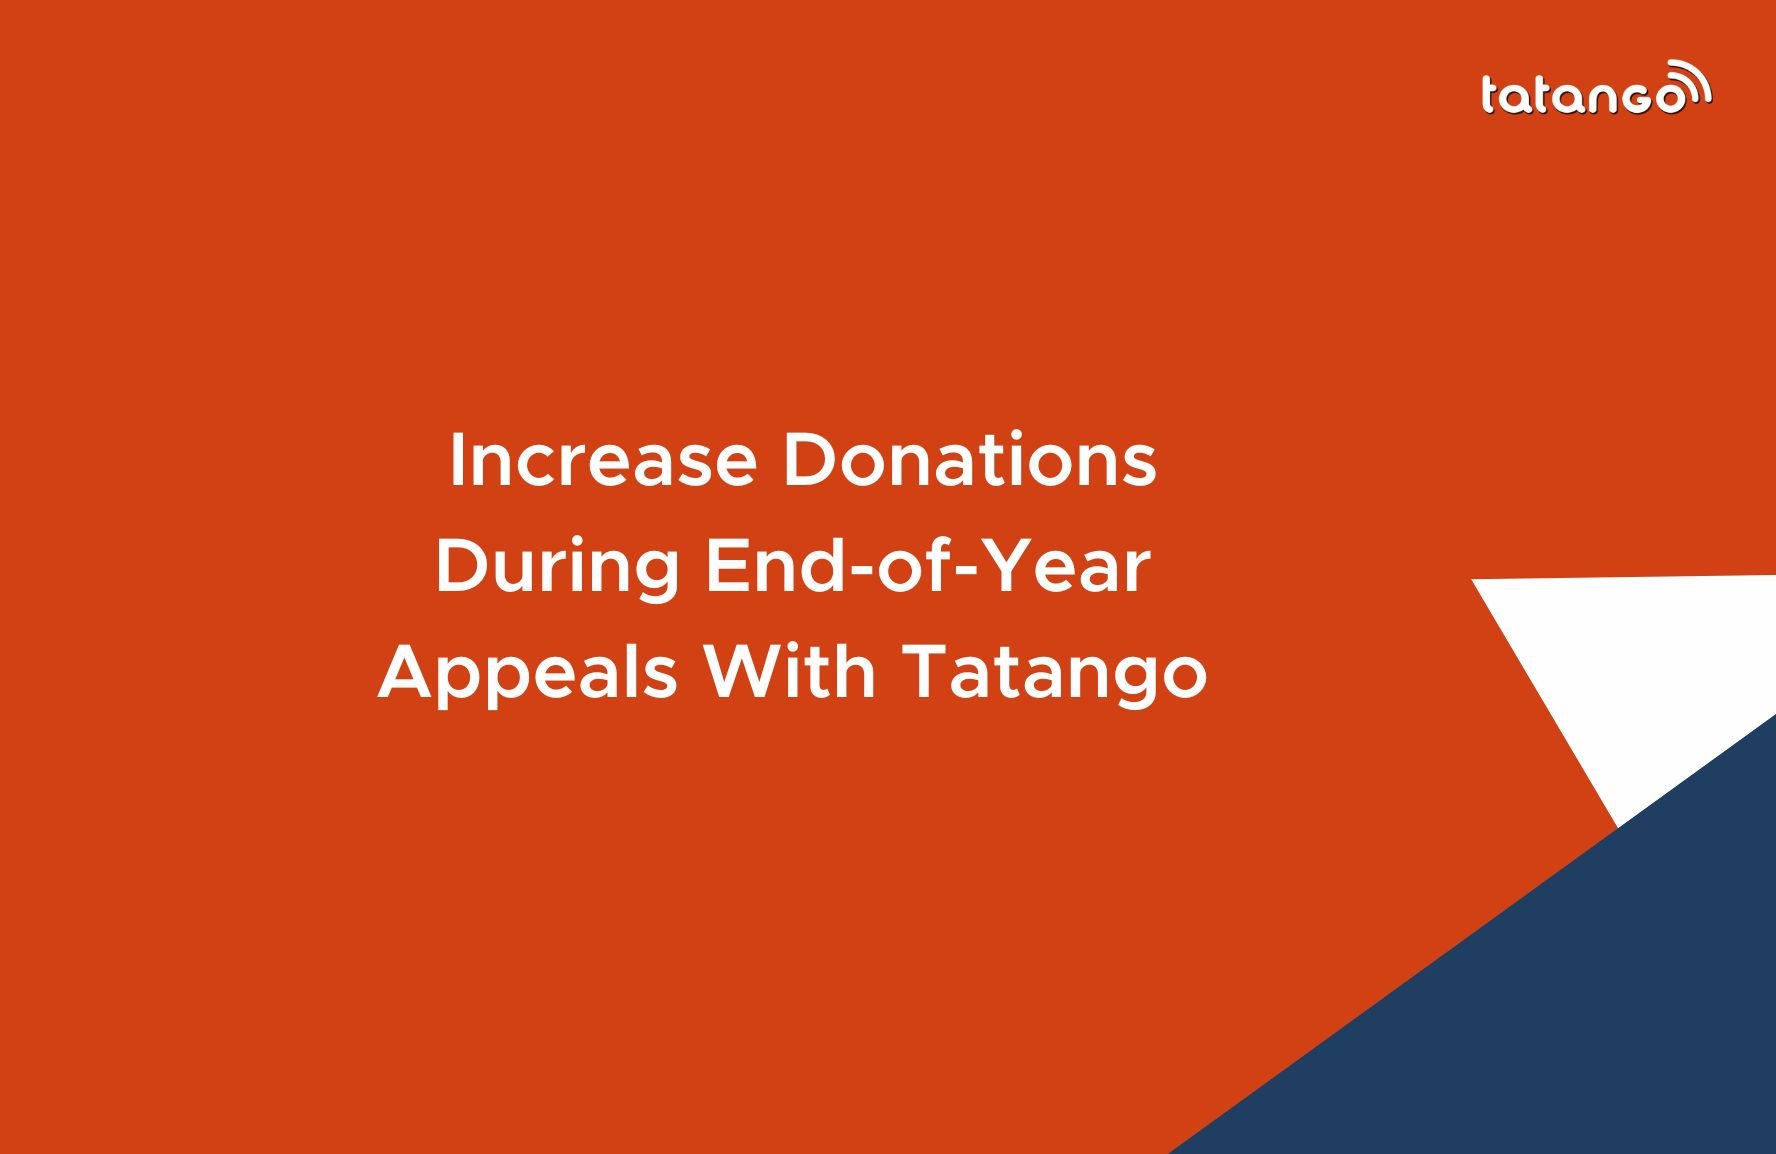 Increase Donations During End-of-Year Appeals With Tatango